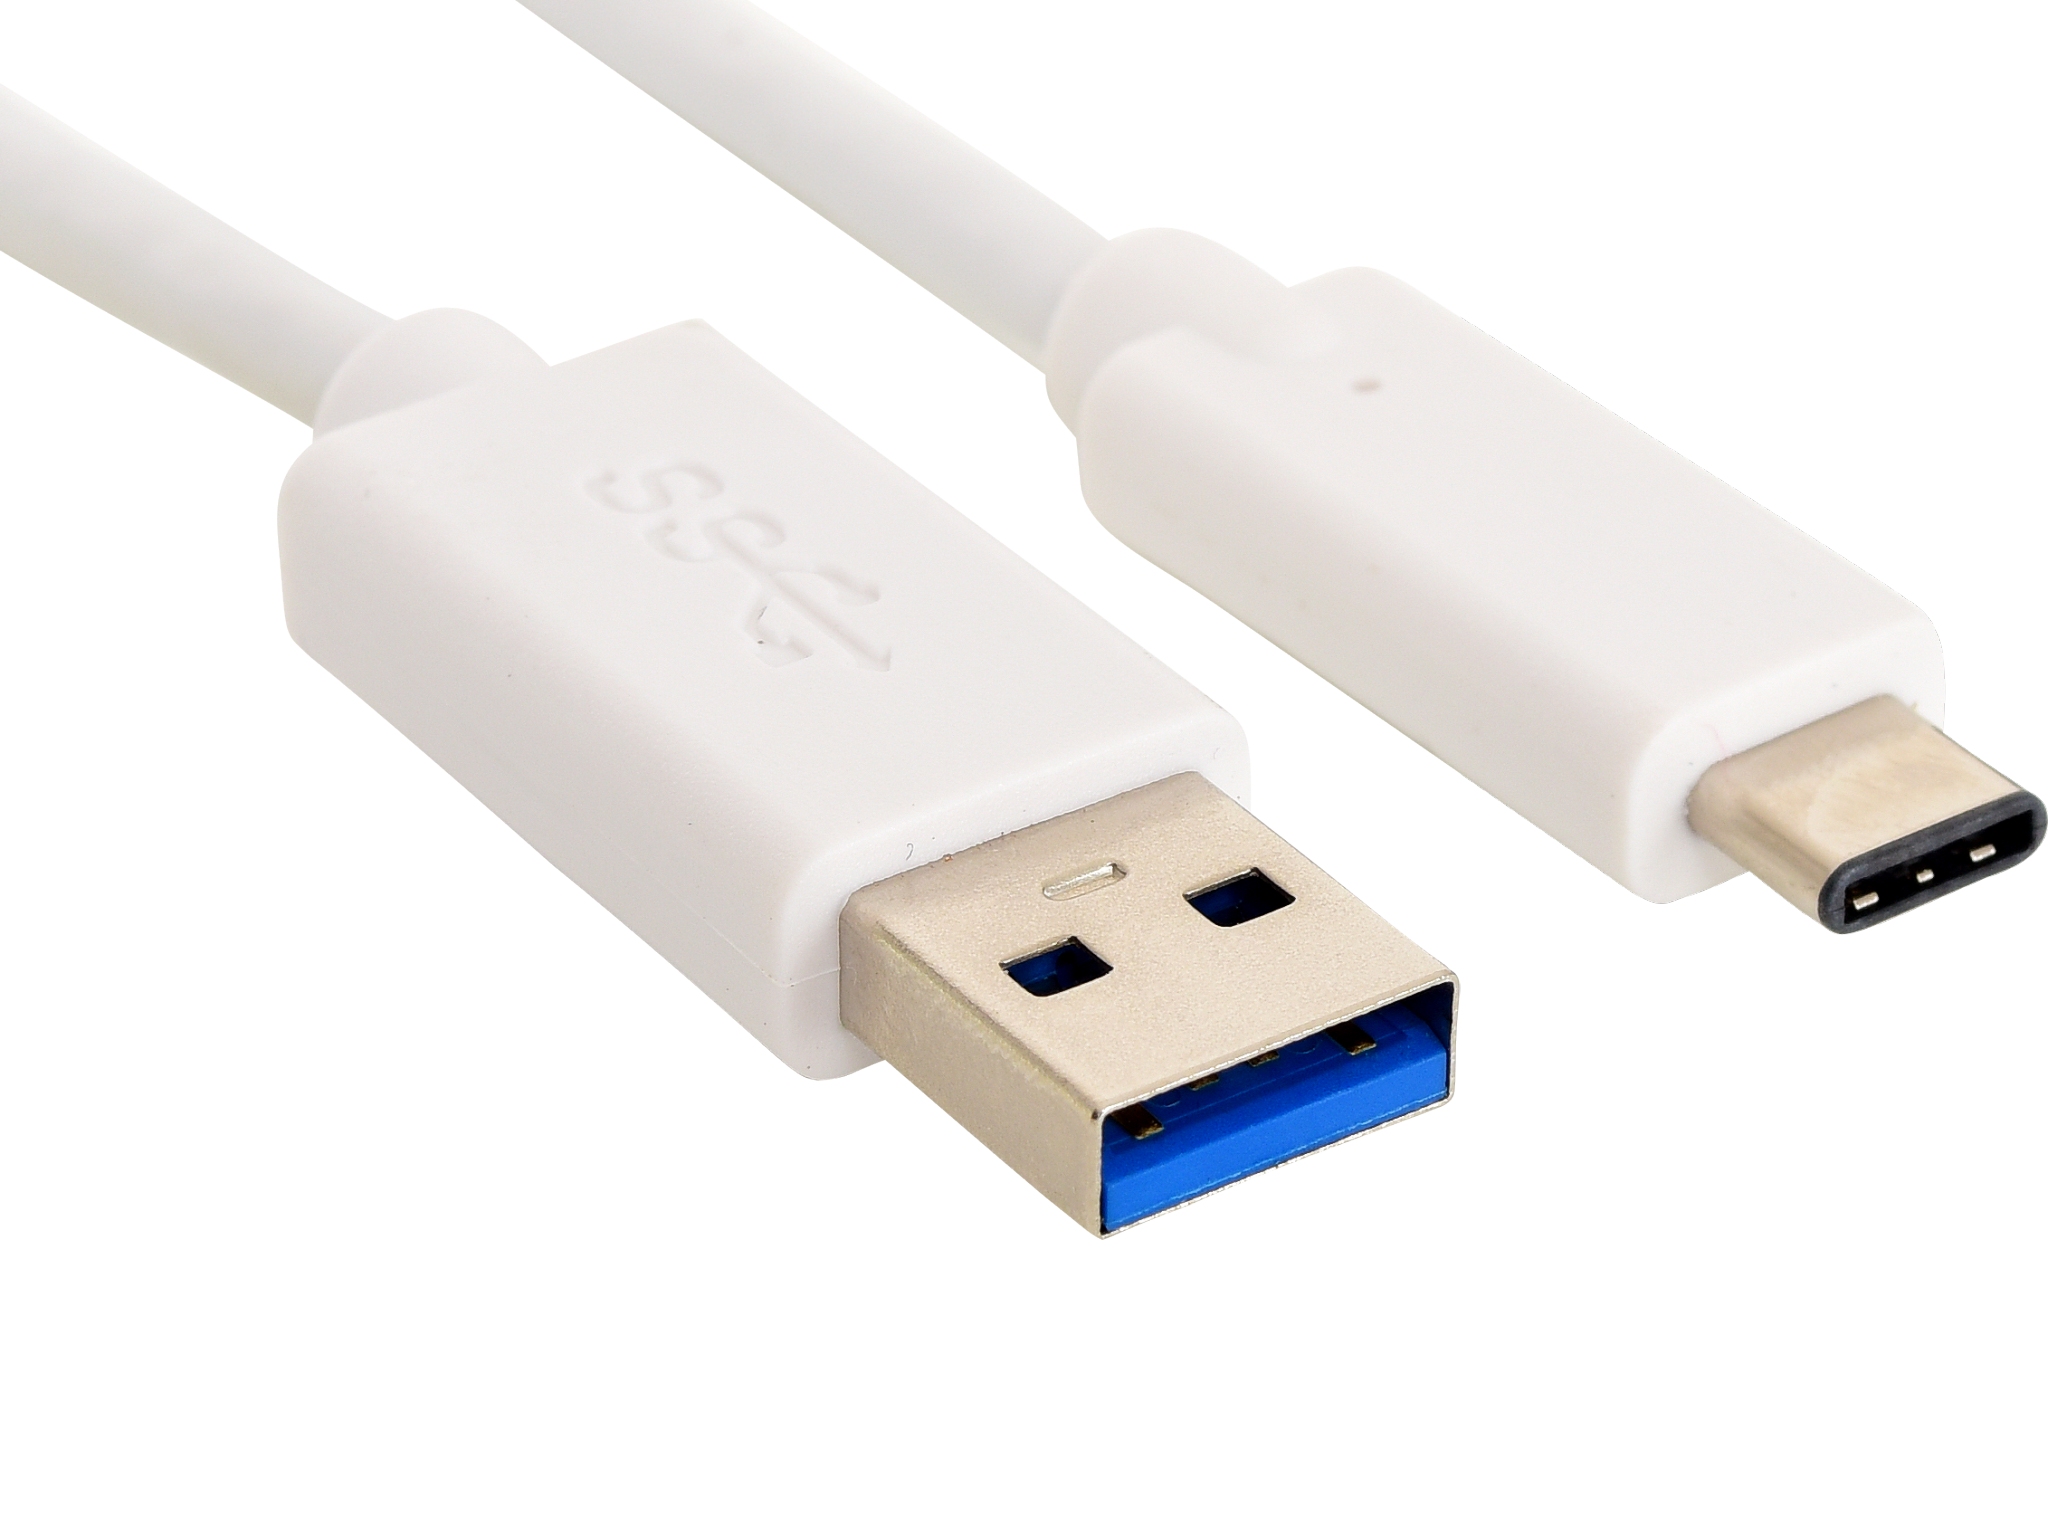 USB-C 3.1 to USB-A 3.0 Cable, White (1m)